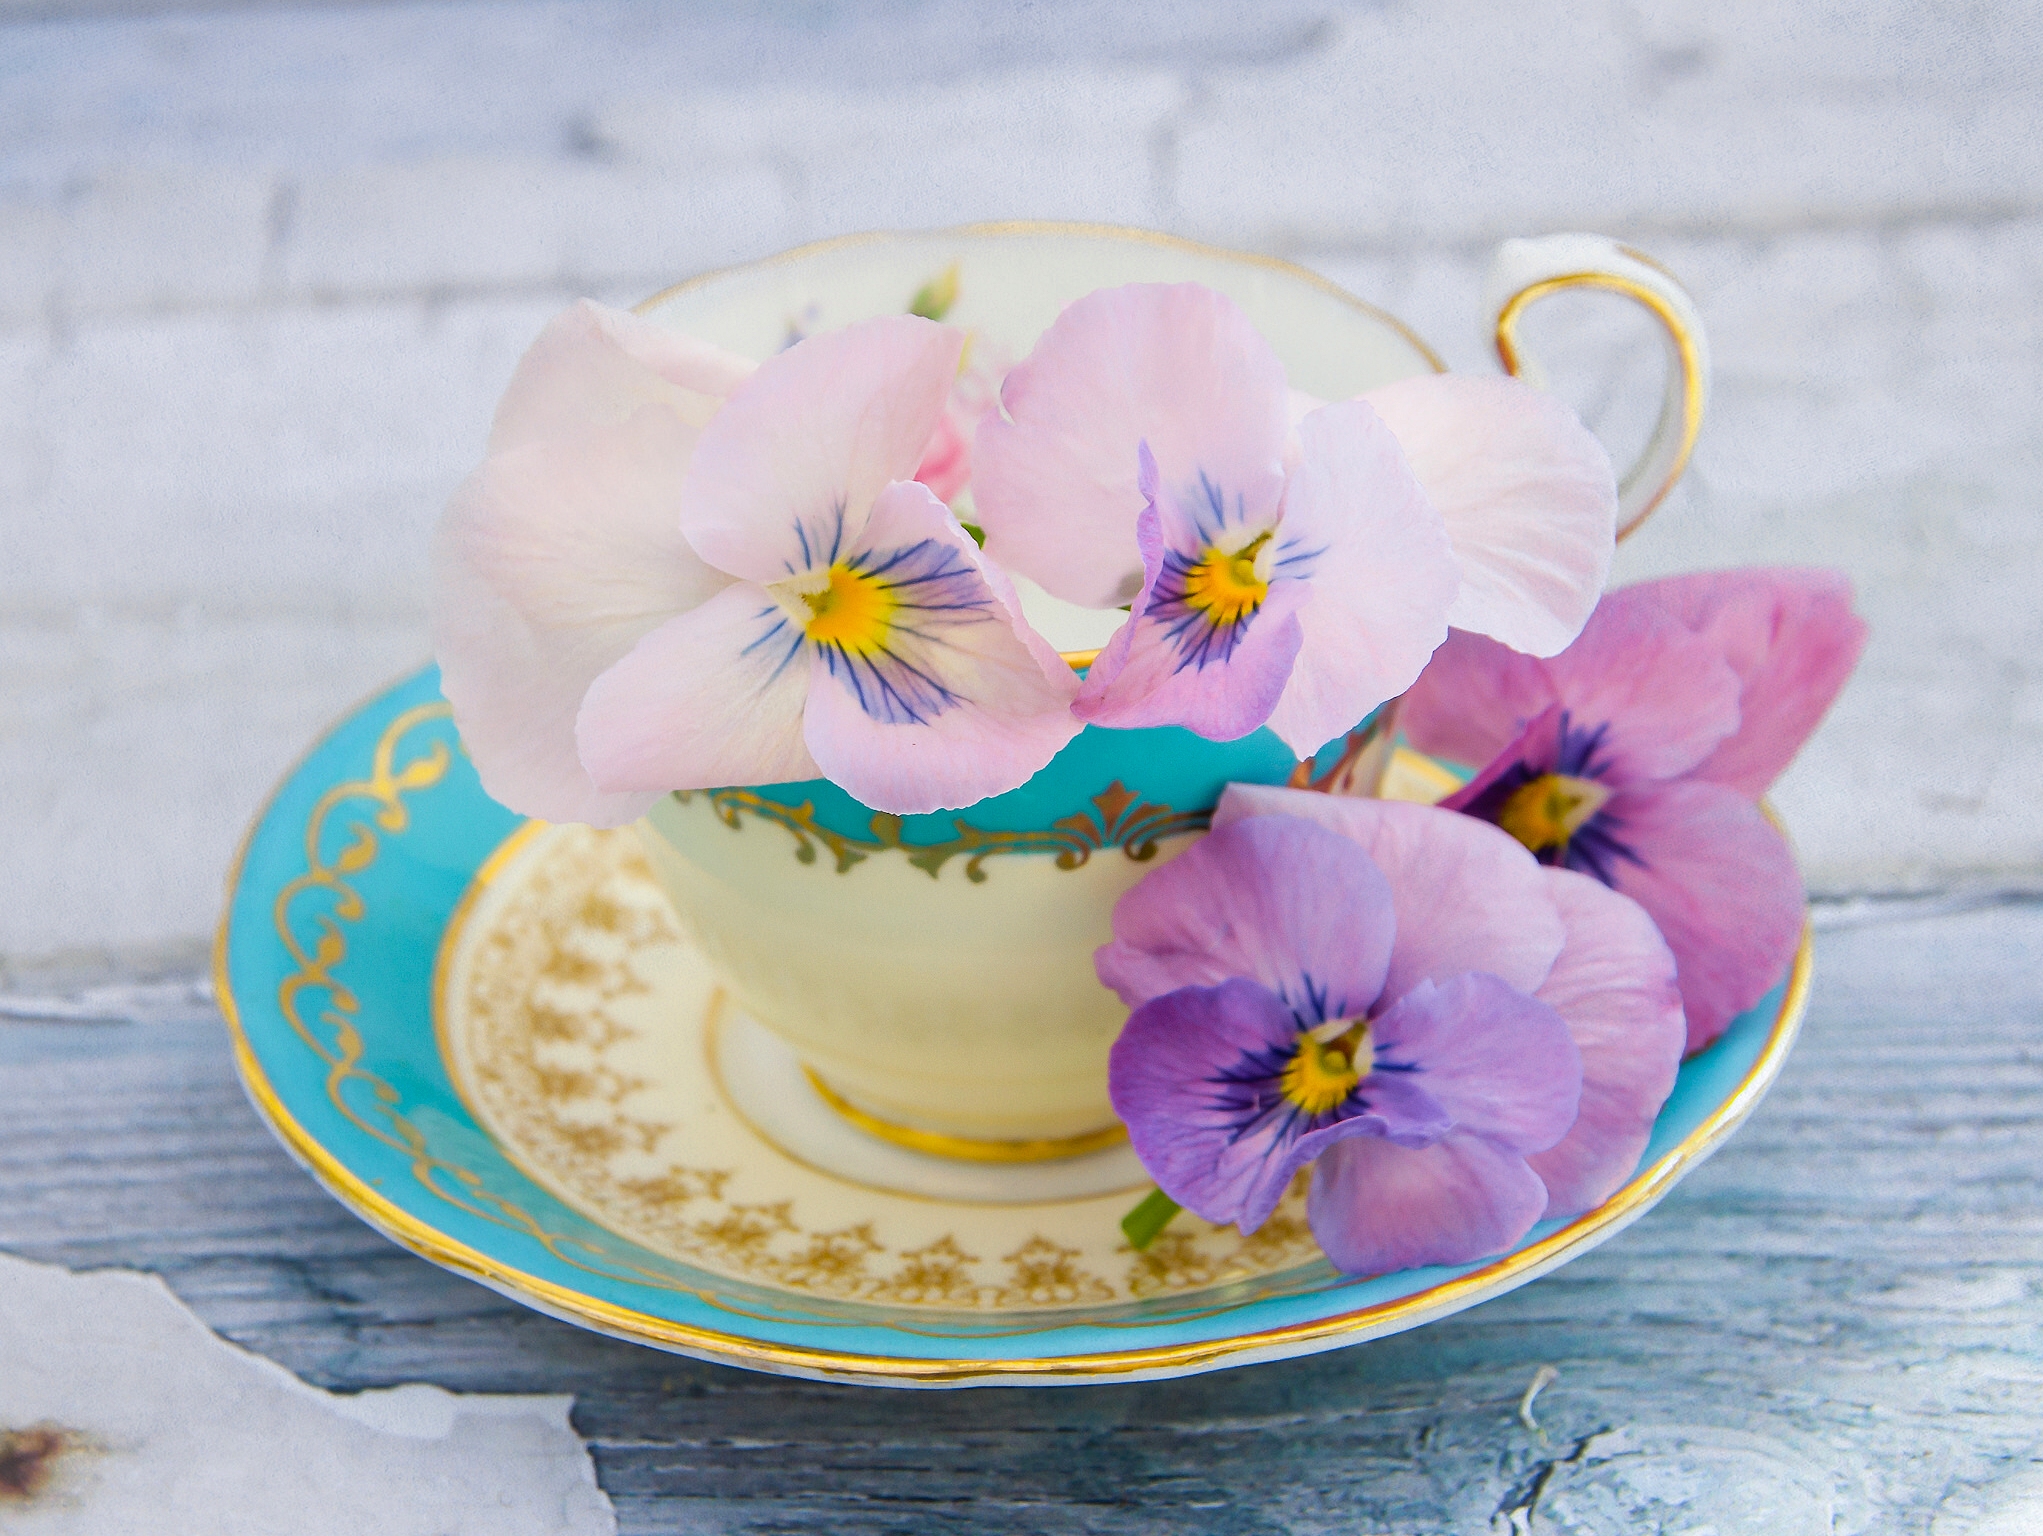 photography, still life, cup, pansy, purple flower, saucer 32K